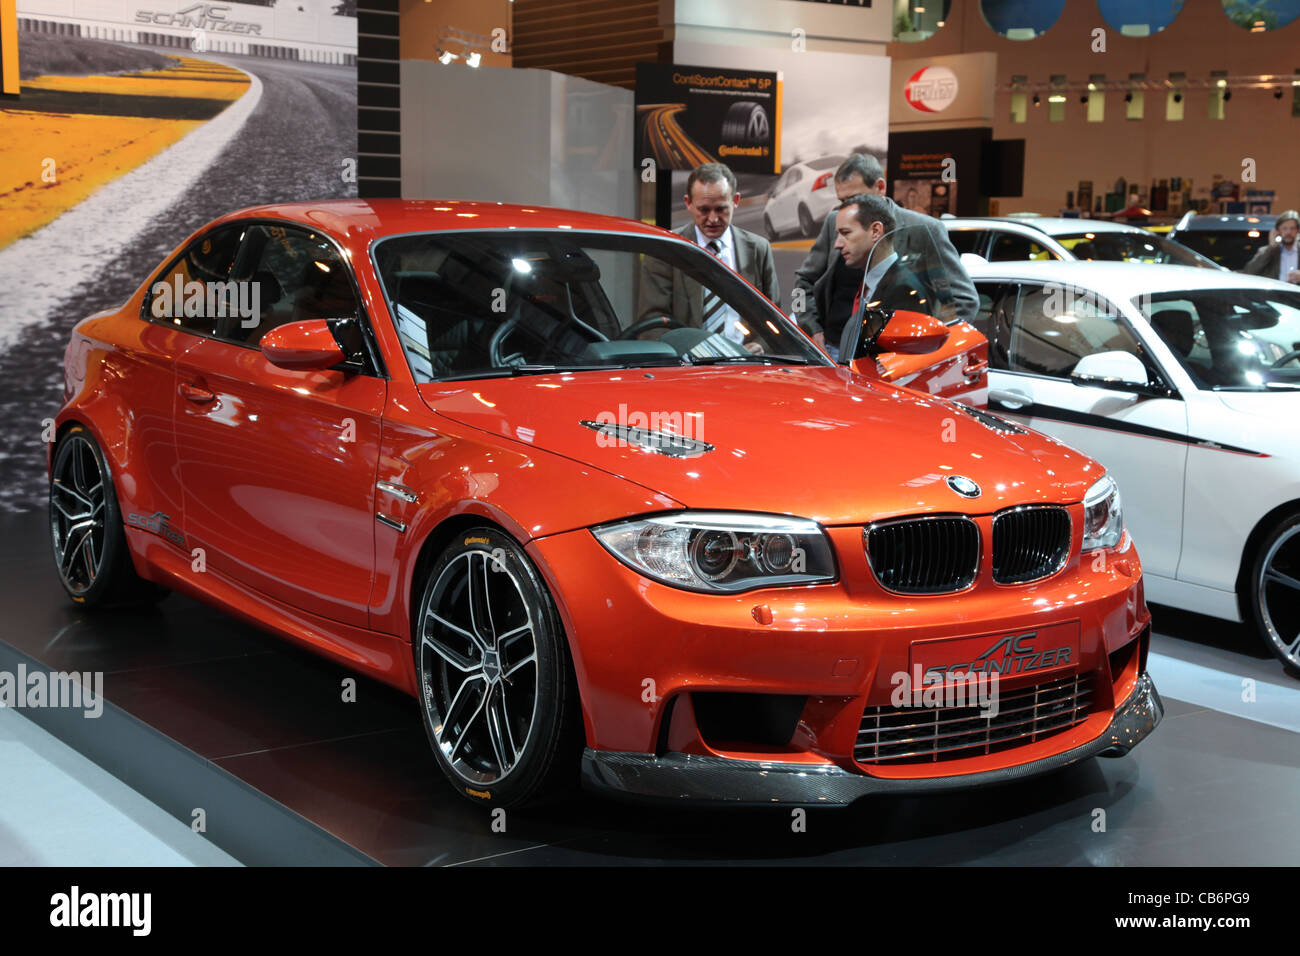 Bmw 1 Series M Coupe From Ac Schnitzer Shown At The Essen Motor Show Stock Photo Alamy